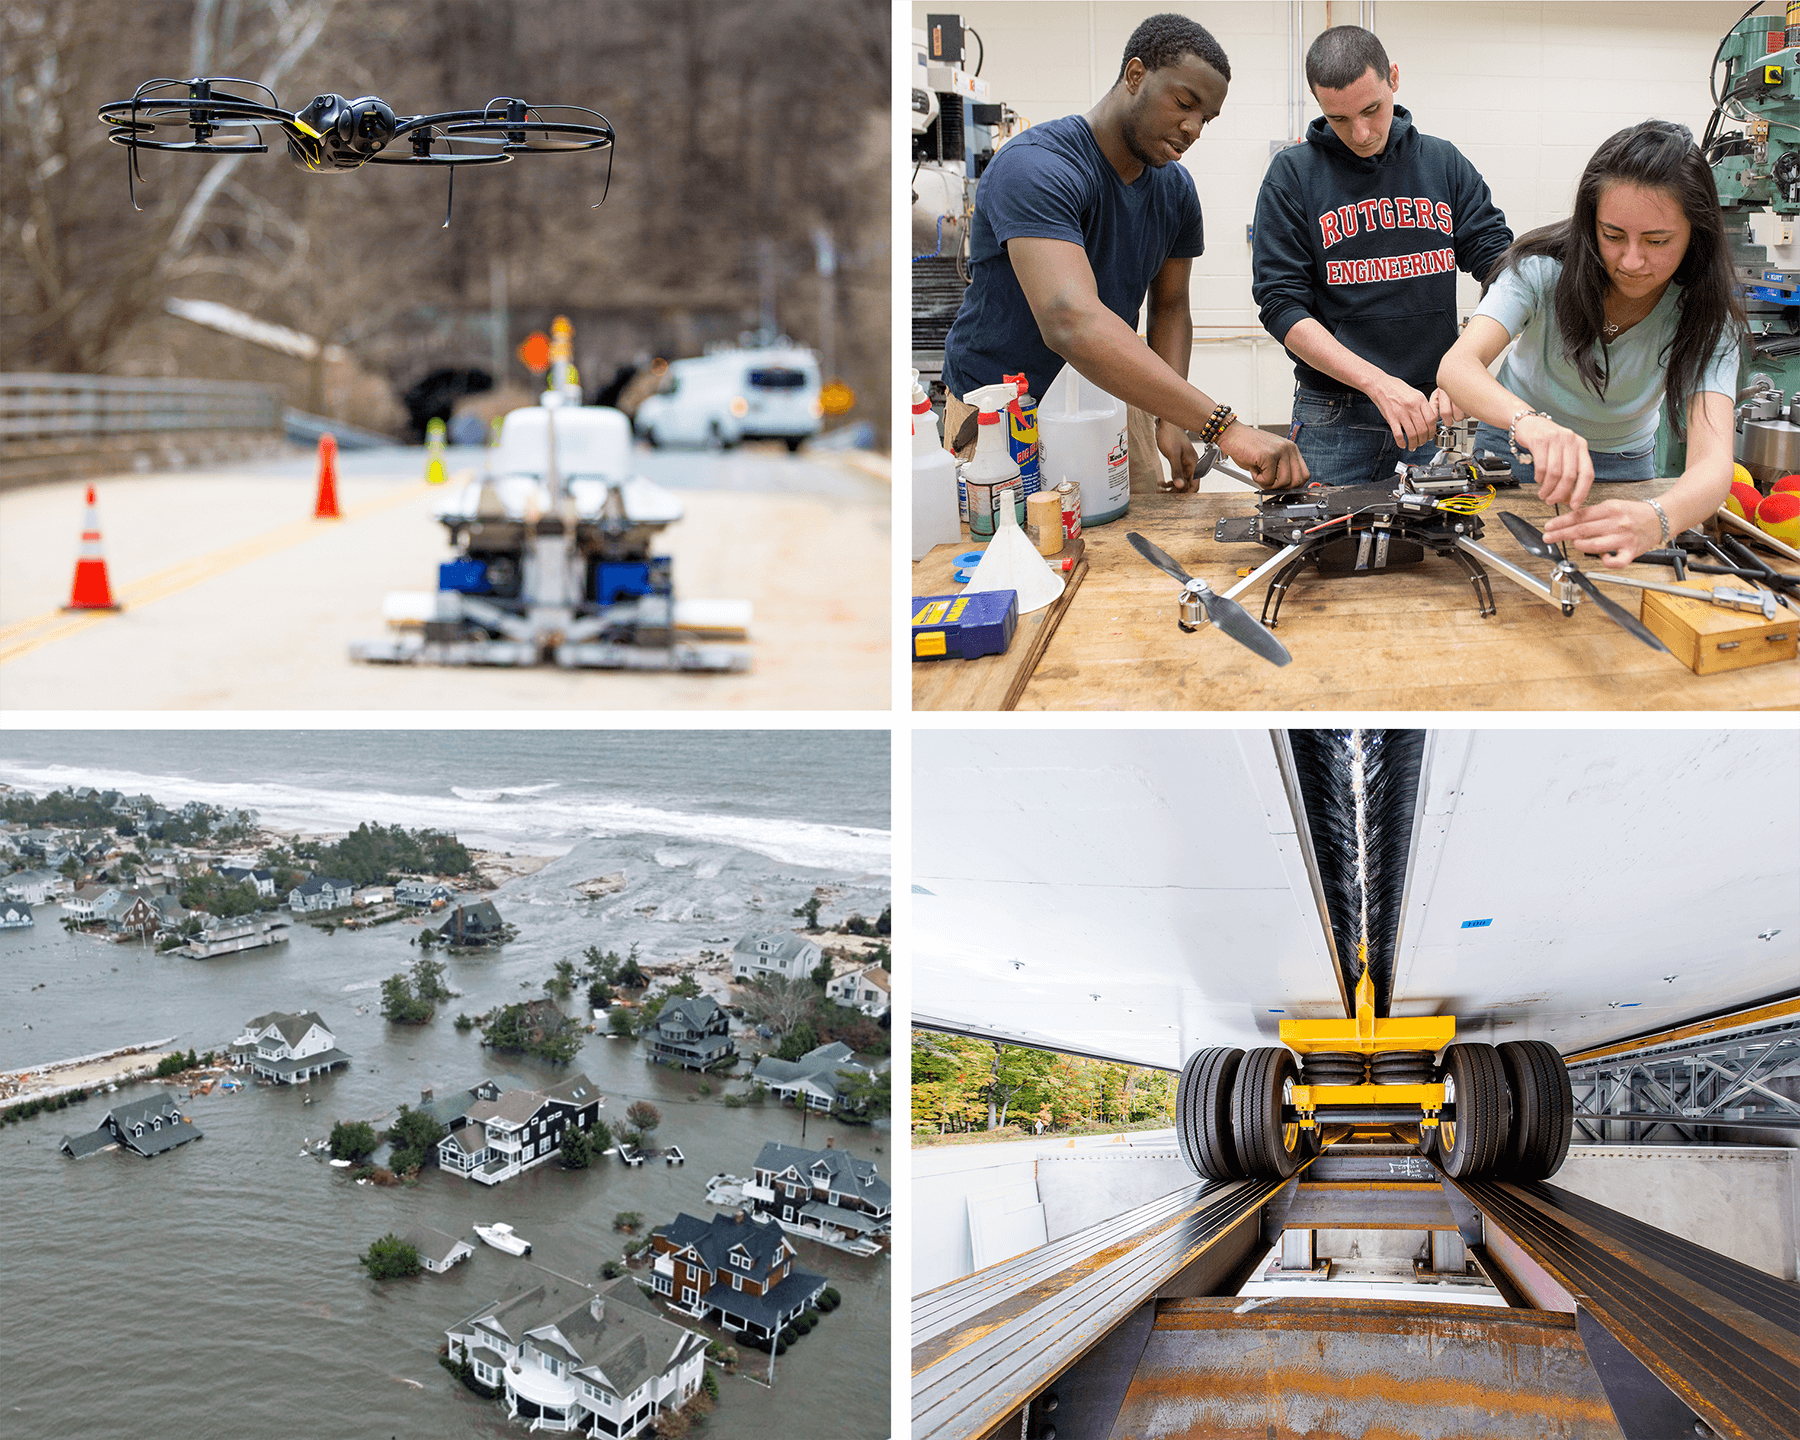 photos of CAIT technologies, Hurricane Sandy, and students building a drone